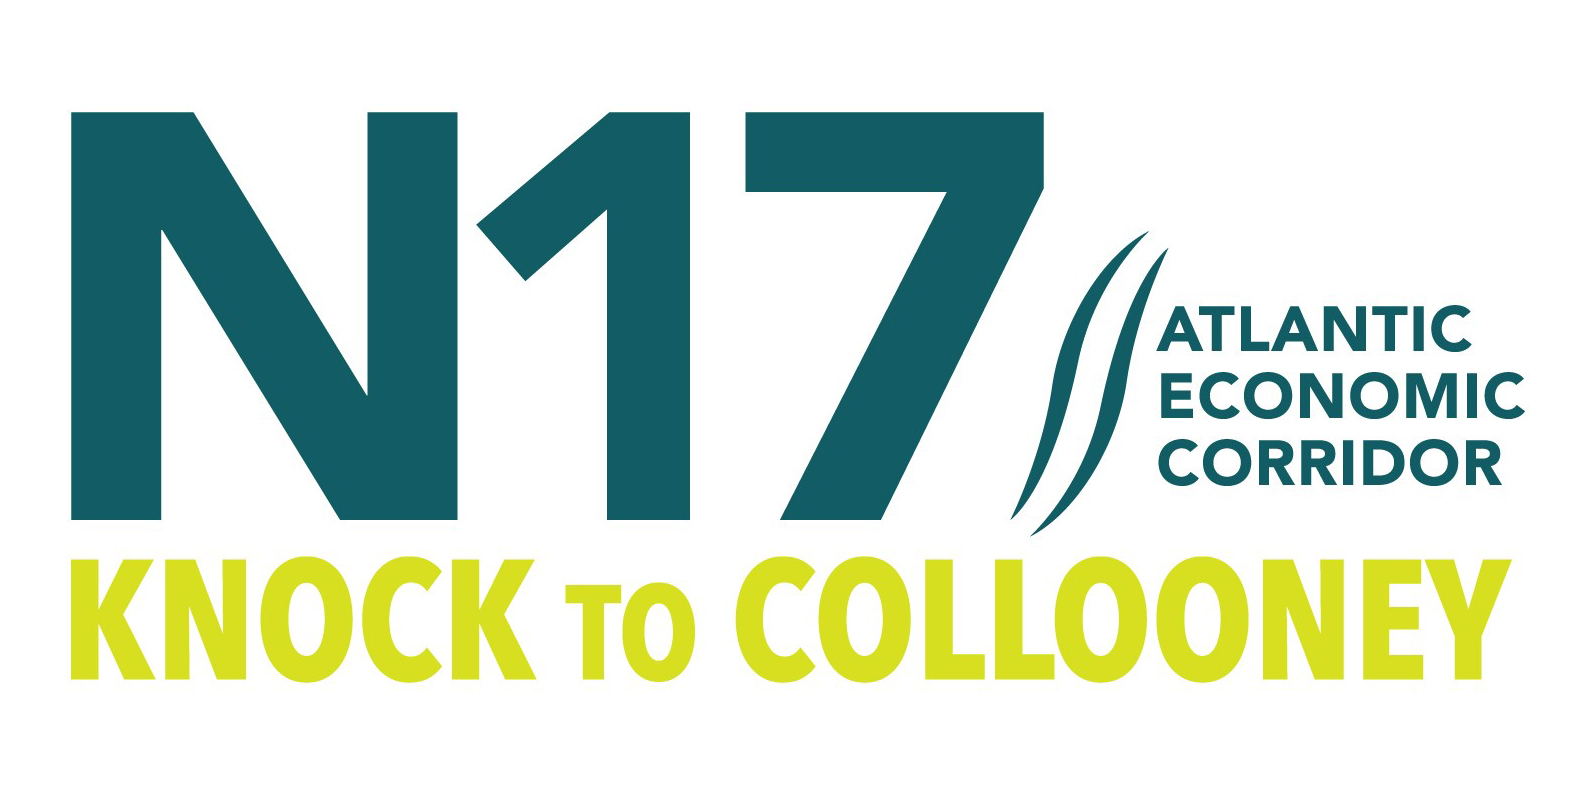 N17 Knock to Collooney - Public Consultations - postponed